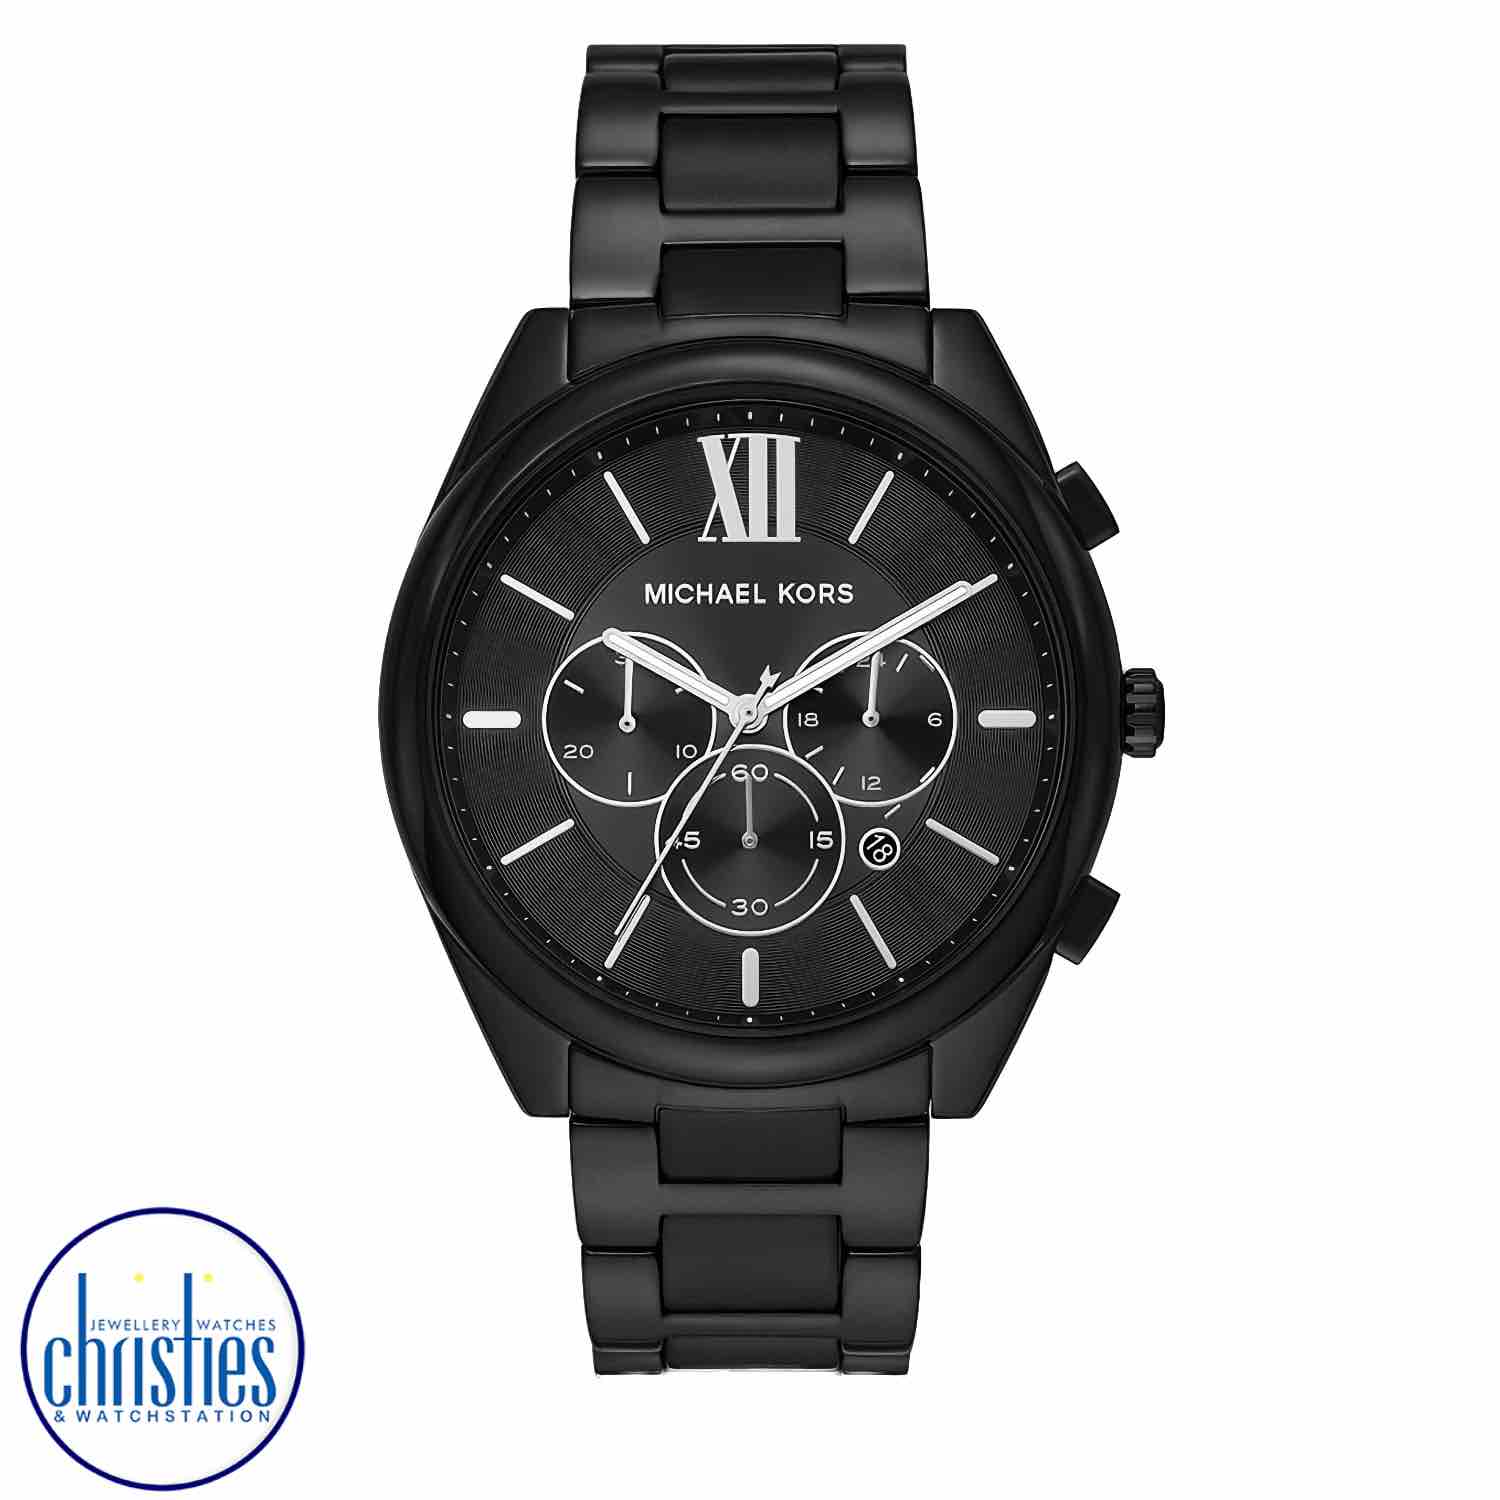 MK8993 Michael Kors Langford Chronograph Black Stainless Steel Watch. MK8993 Michael Kors Langford Chronograph Black Stainless Steel Watch Afterpay - Split your purchase into 4 instalments - Pay for your purchase over 4 instalments, due every two weeks. f